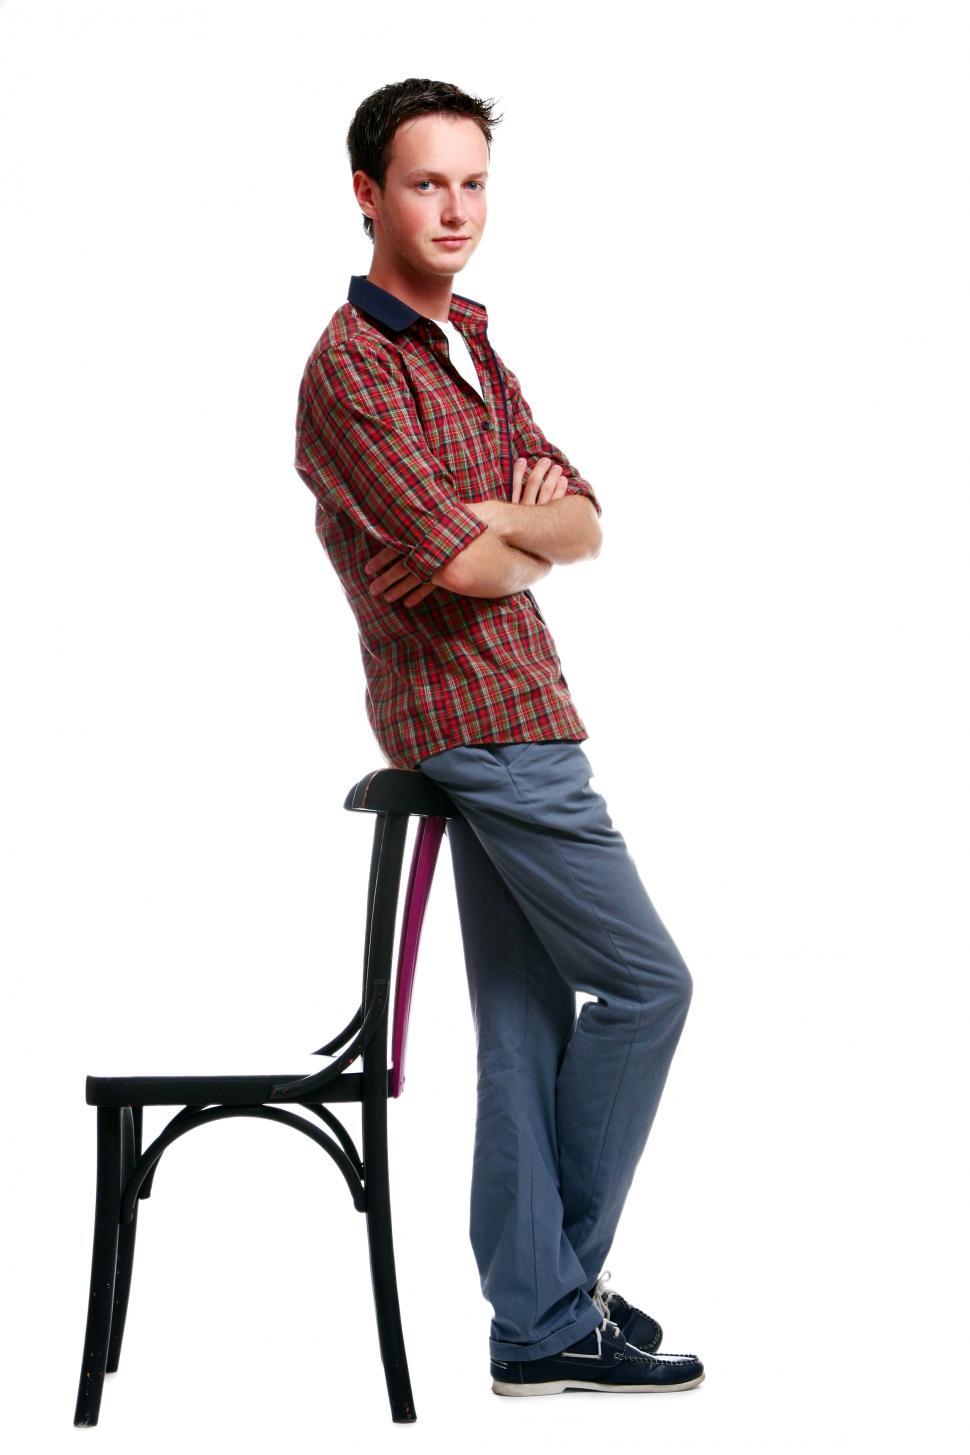 Free Image of boy on white leaning on a chair 